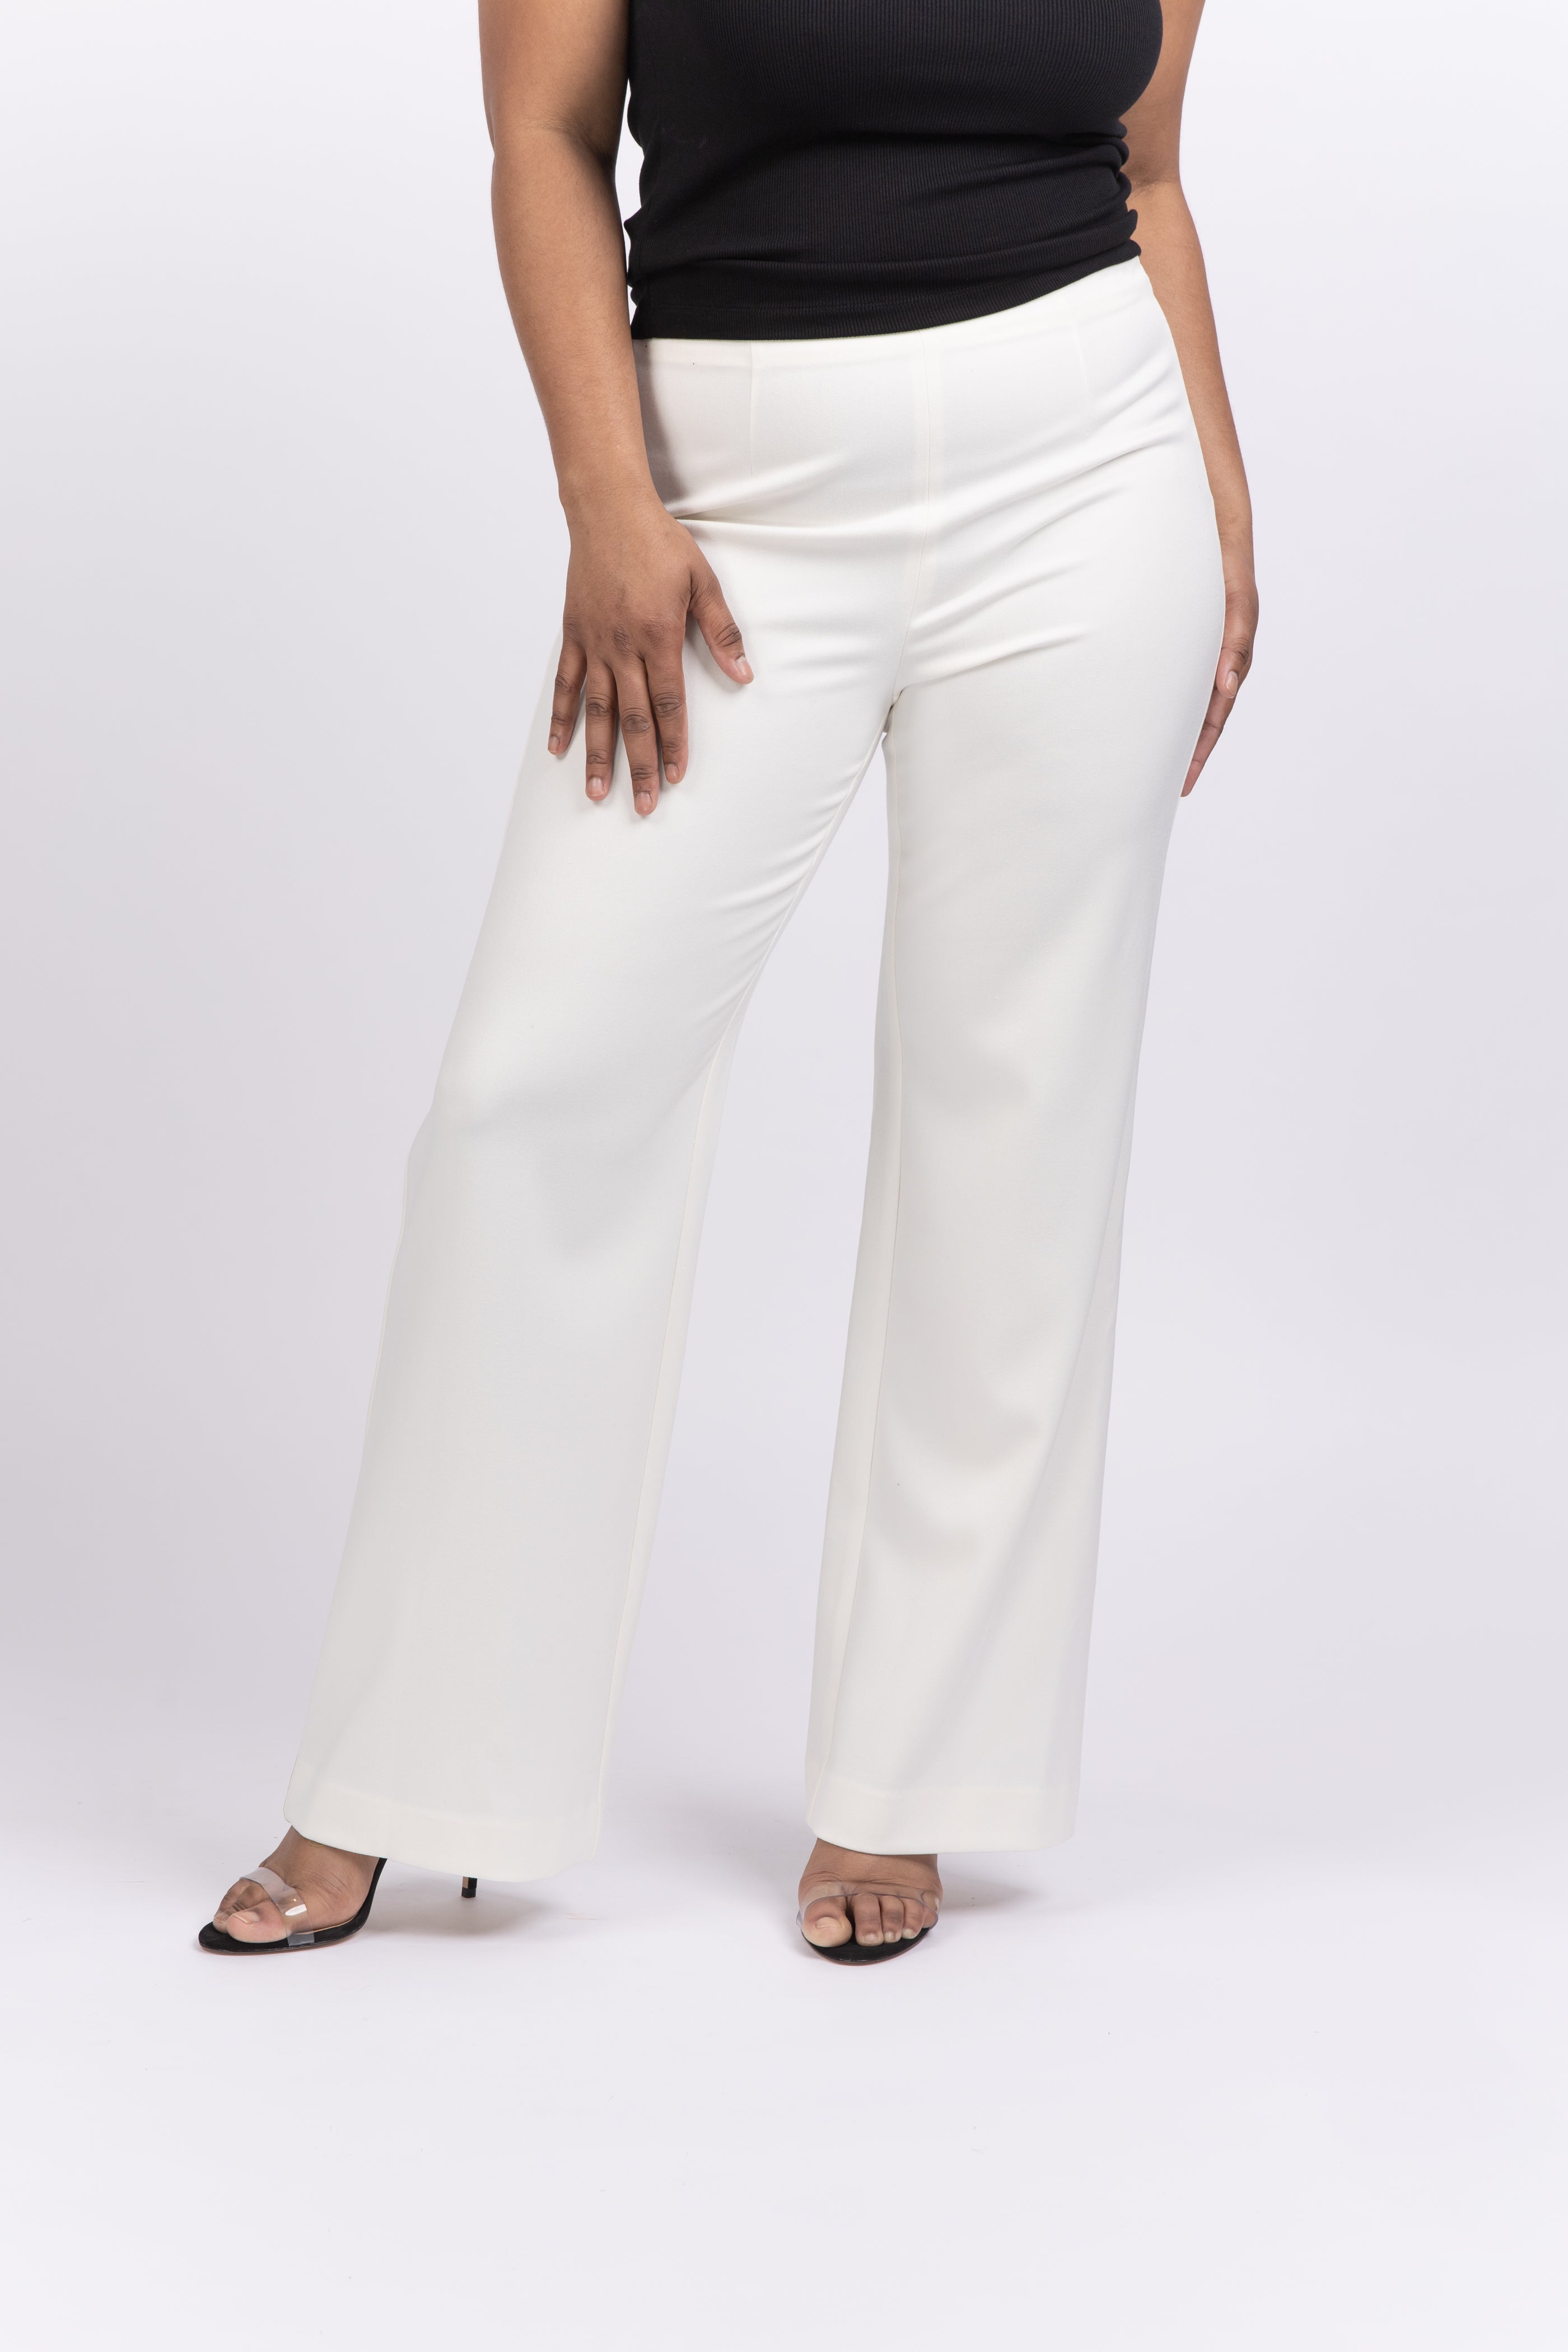 Buy Women's Plus Size Flared Fit Viscose Rayon Palazzo Trousers (Cream,  Size: 8XL) Online In India At Discounted Prices